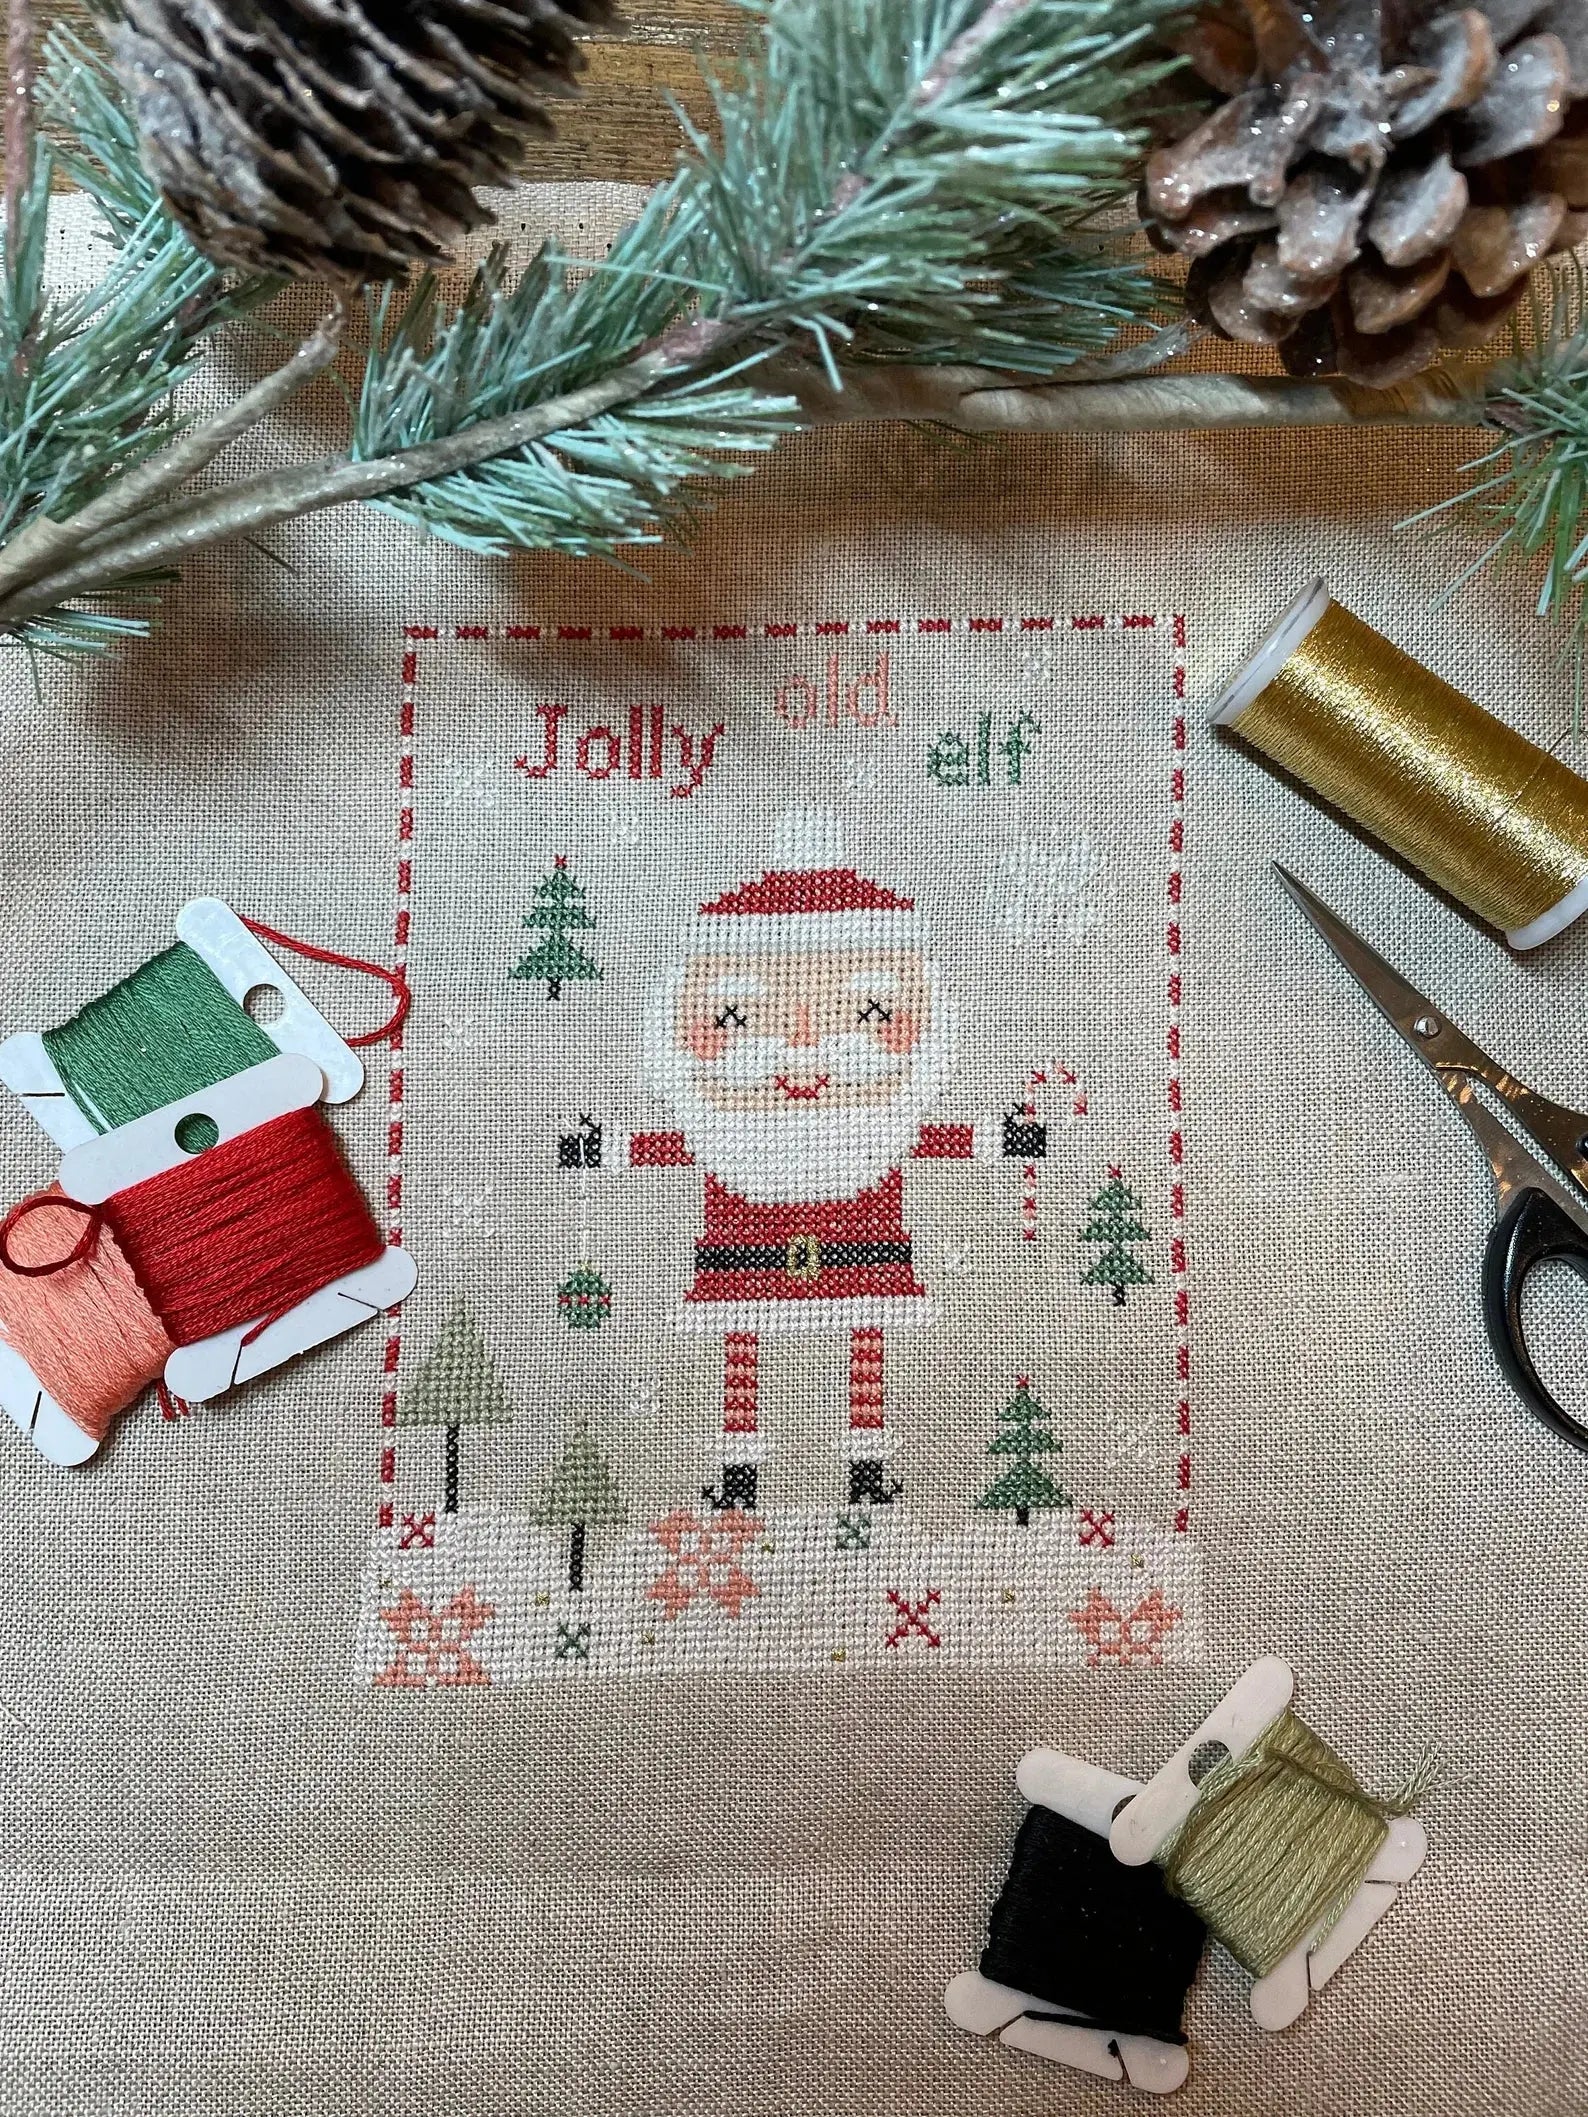 Santa, Jolly Old Elf by Emily Call Stitching Emily Call Stitching